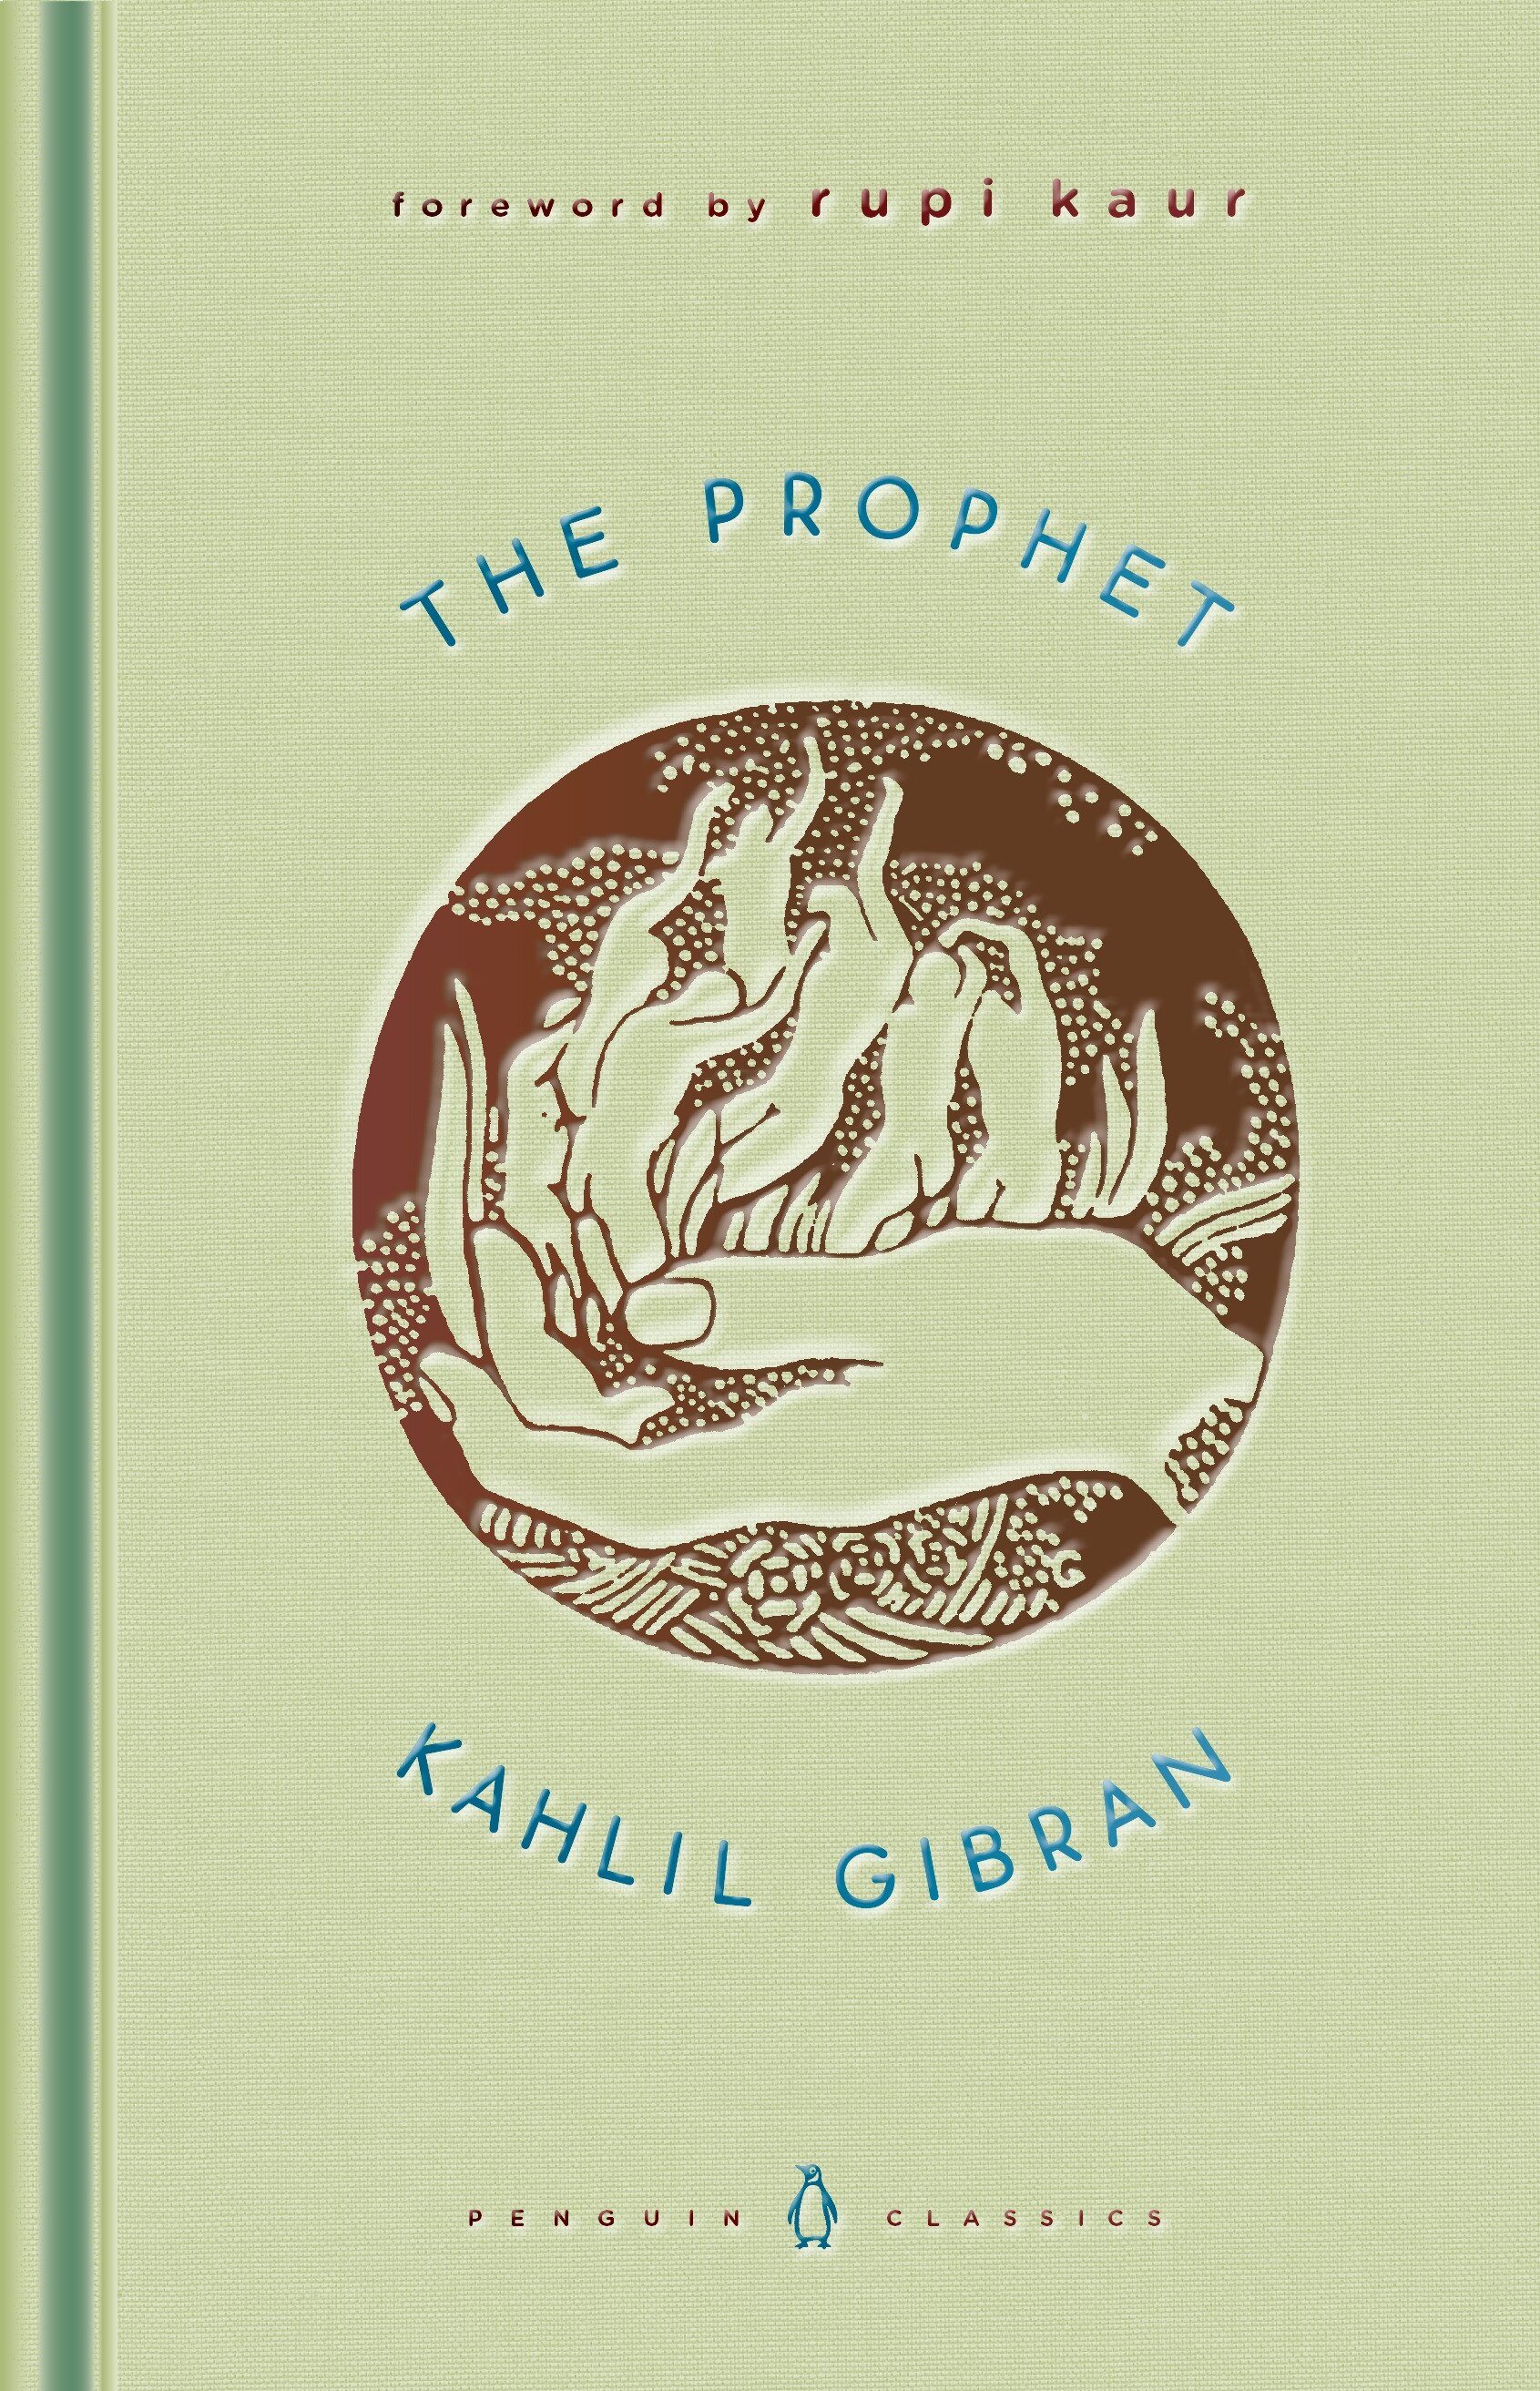 The cover of The Prophet by Kahlil Gibran features an illustration of several people dancing in the palm of a hand.